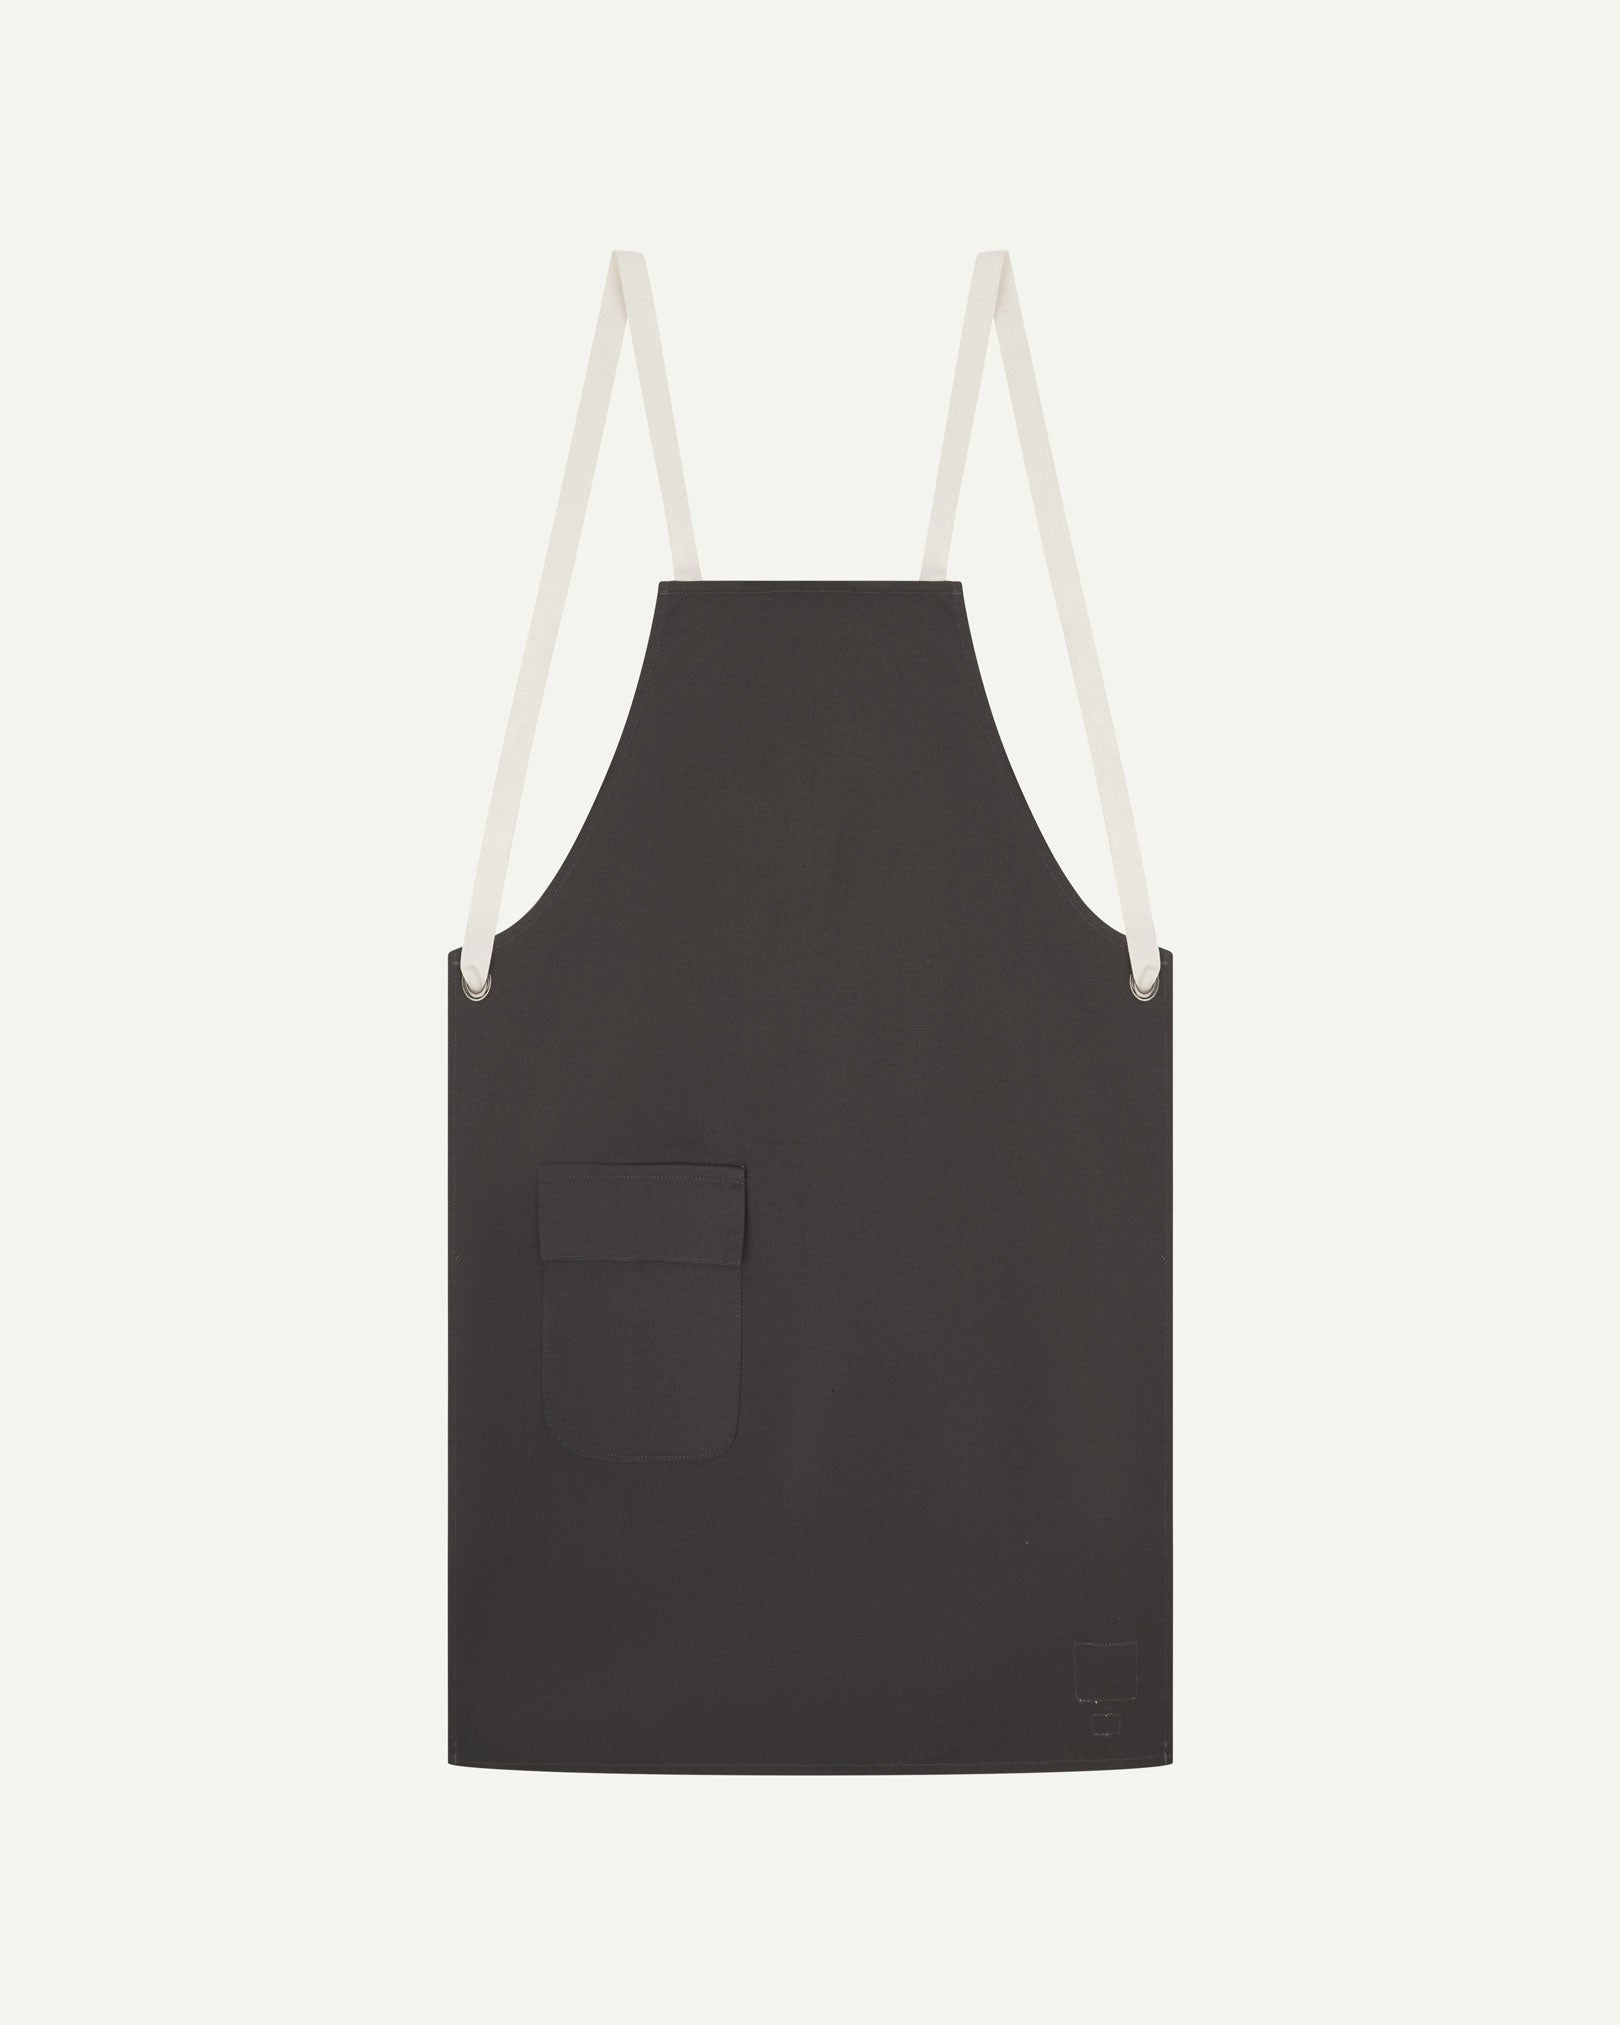 Flat shot of Uskees charcoal-grey canvas apron showing cream straps and front flap pocket.